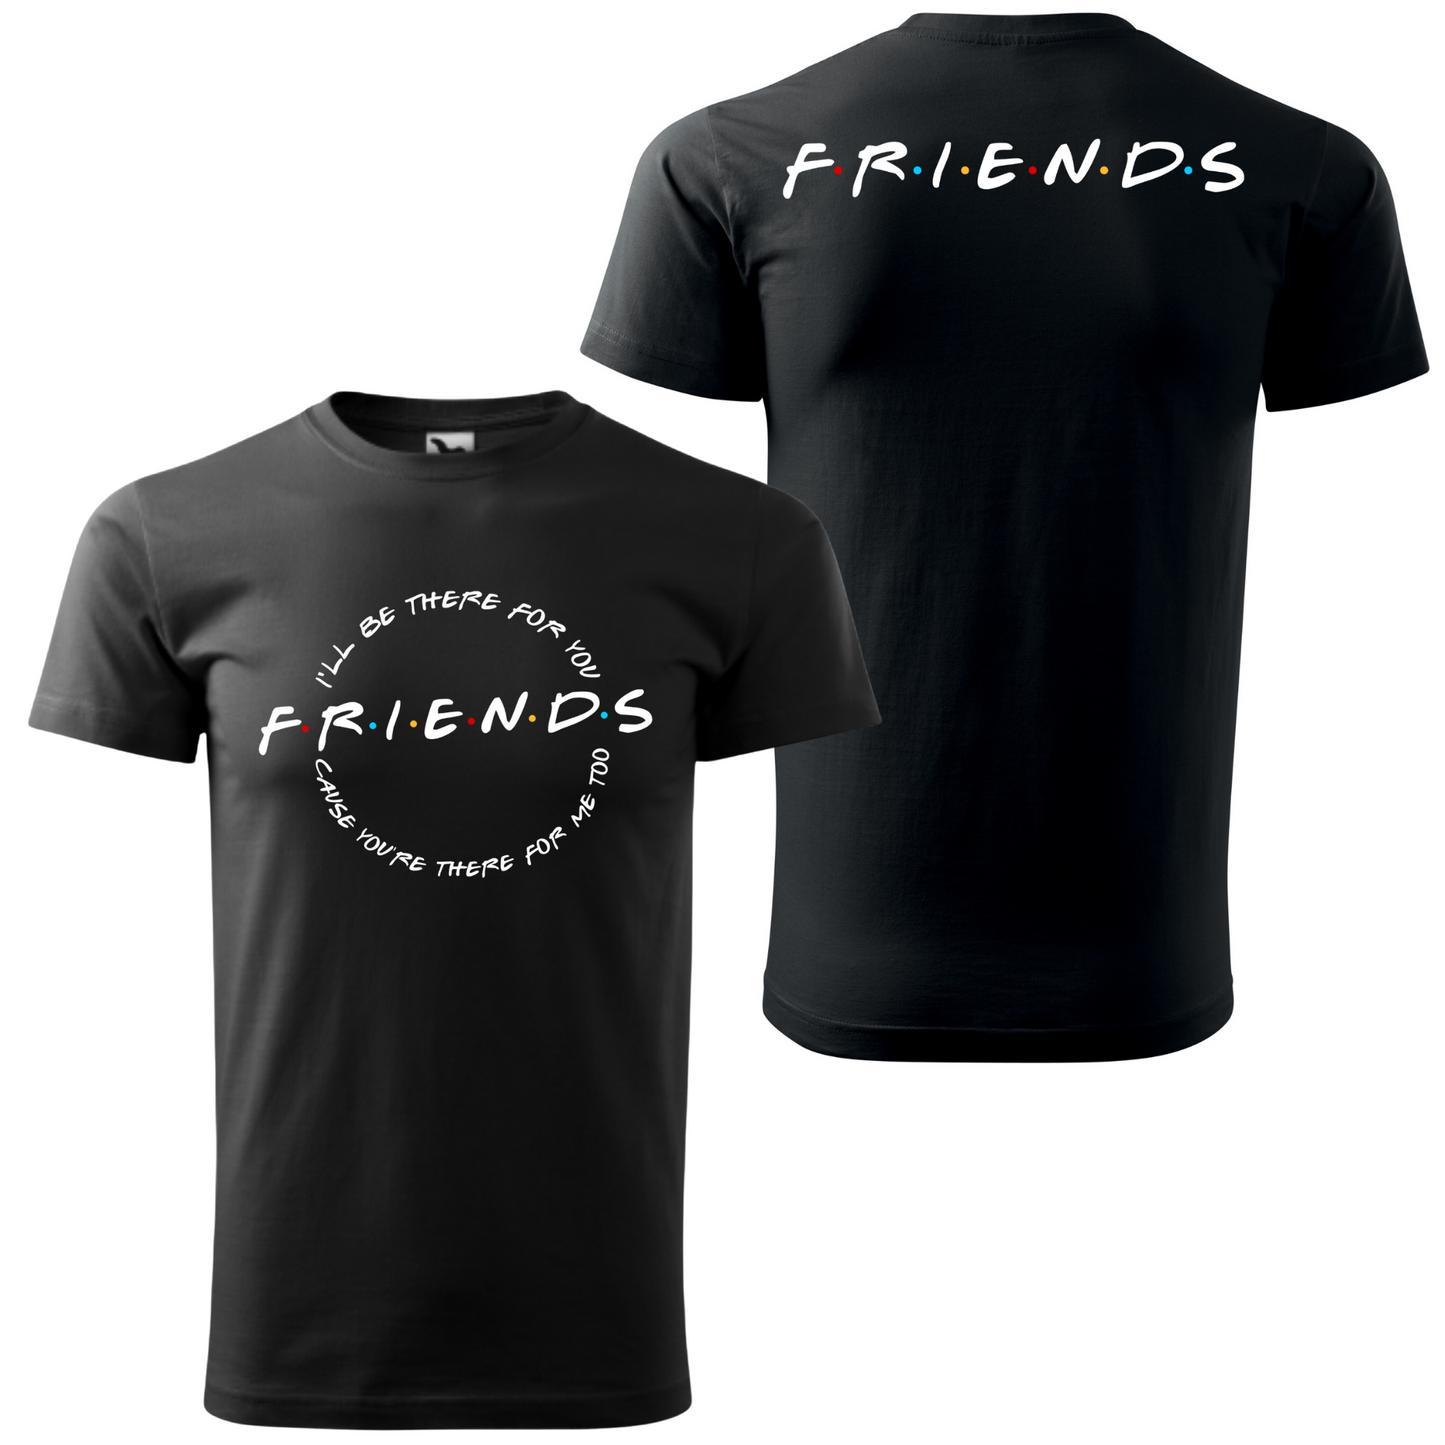 Tricou personalizat barbat -Friends- I'll Be There For You